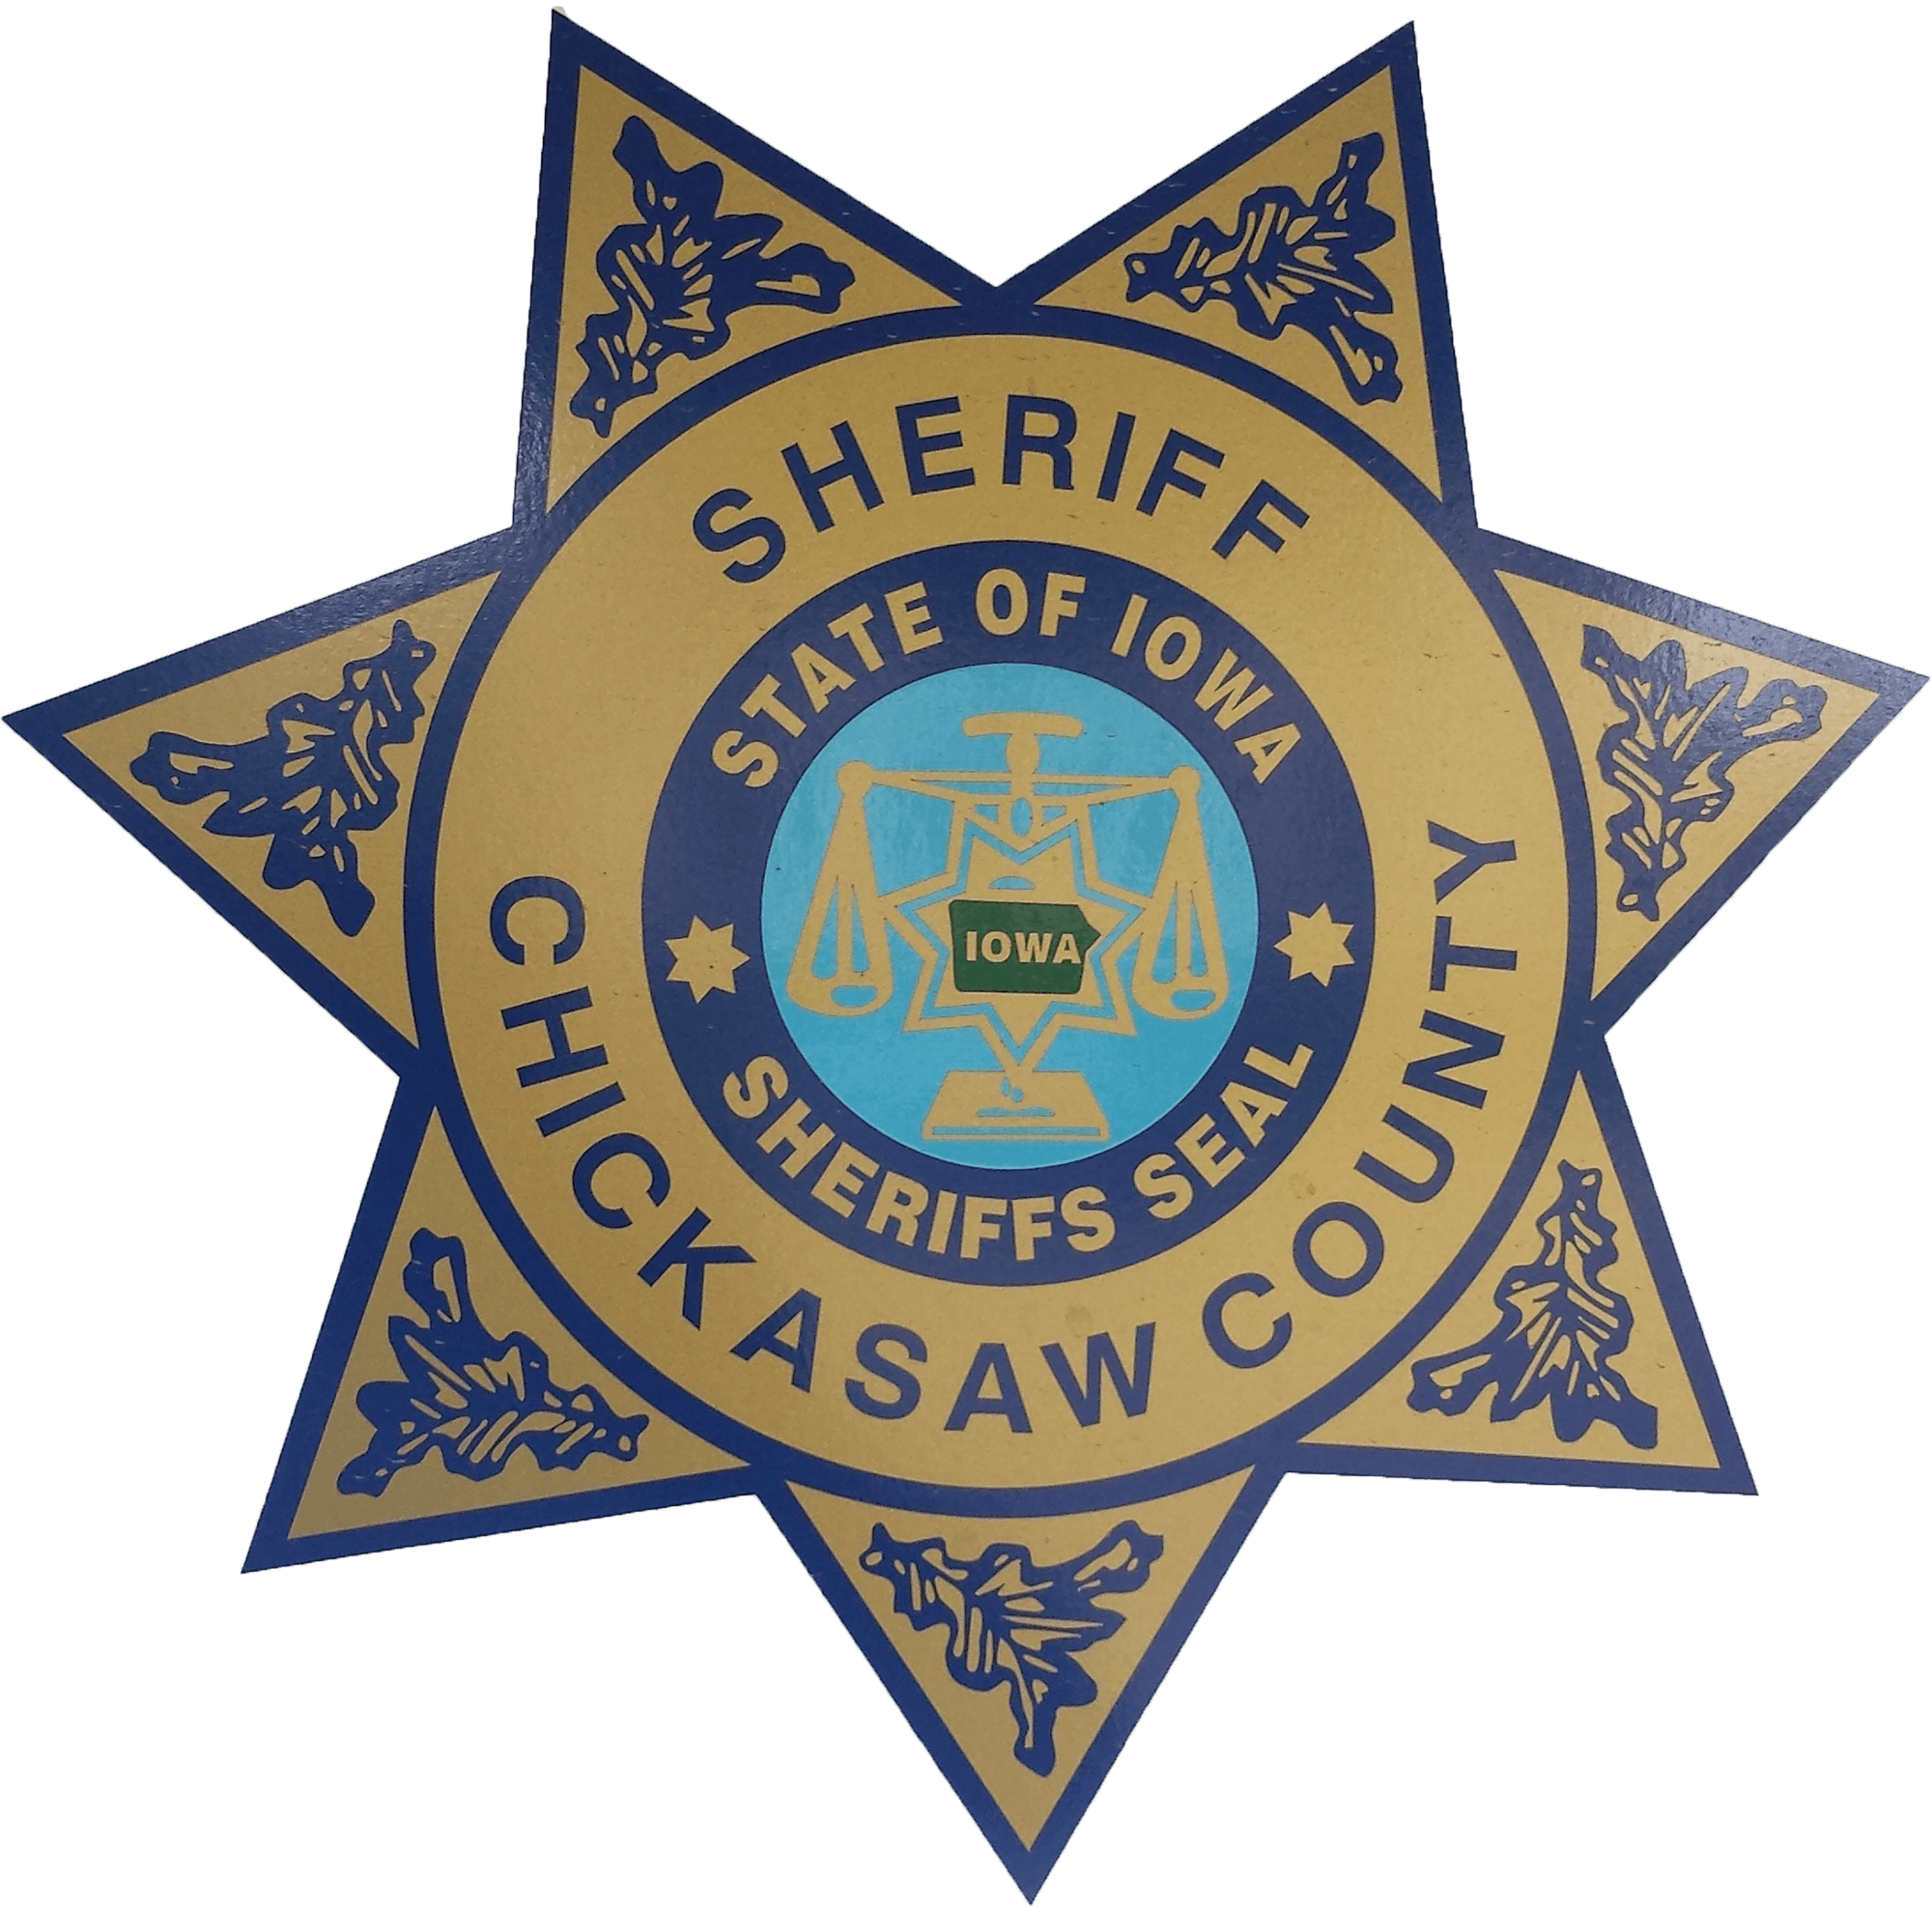 Chickasaw County Sheriff's Office Badge